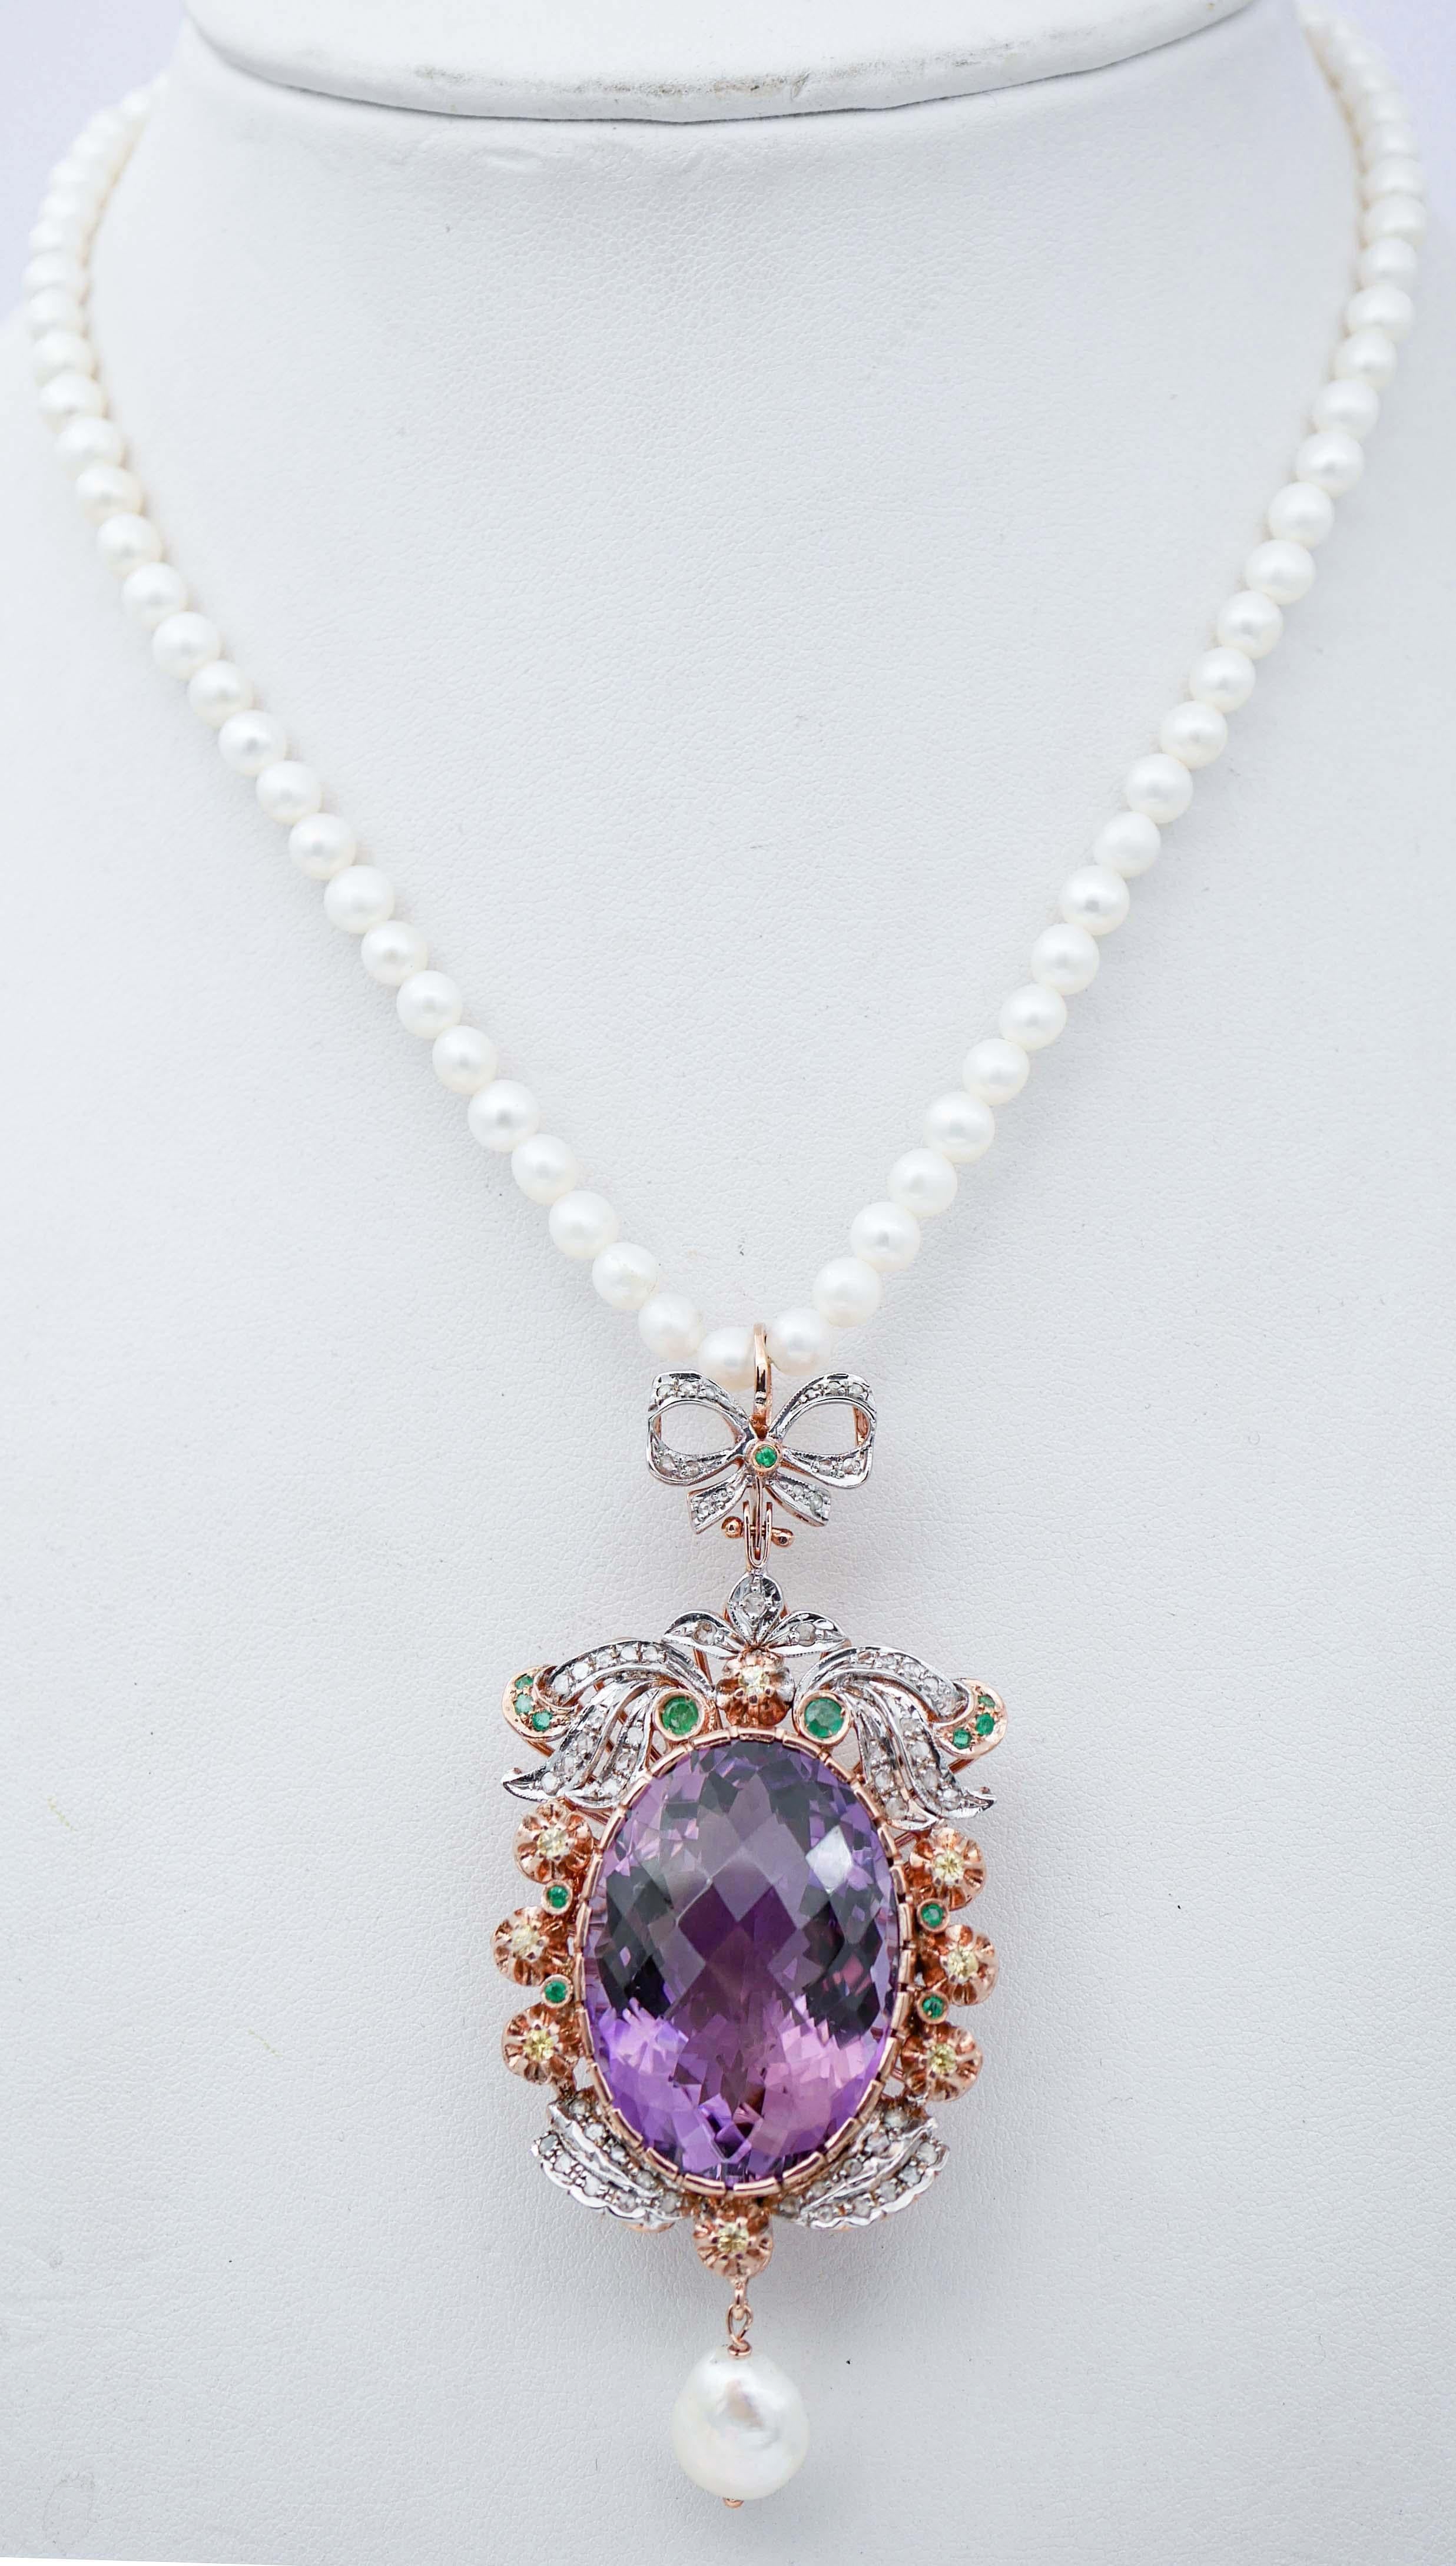 SHIPPING POLICY:
No additional costs will be added to this order.
Shipping costs will be totally covered by the seller (customs duties included).

Fantastic pendant necklace in 14 kt rose gold and silver structure mounted with a central amethyst